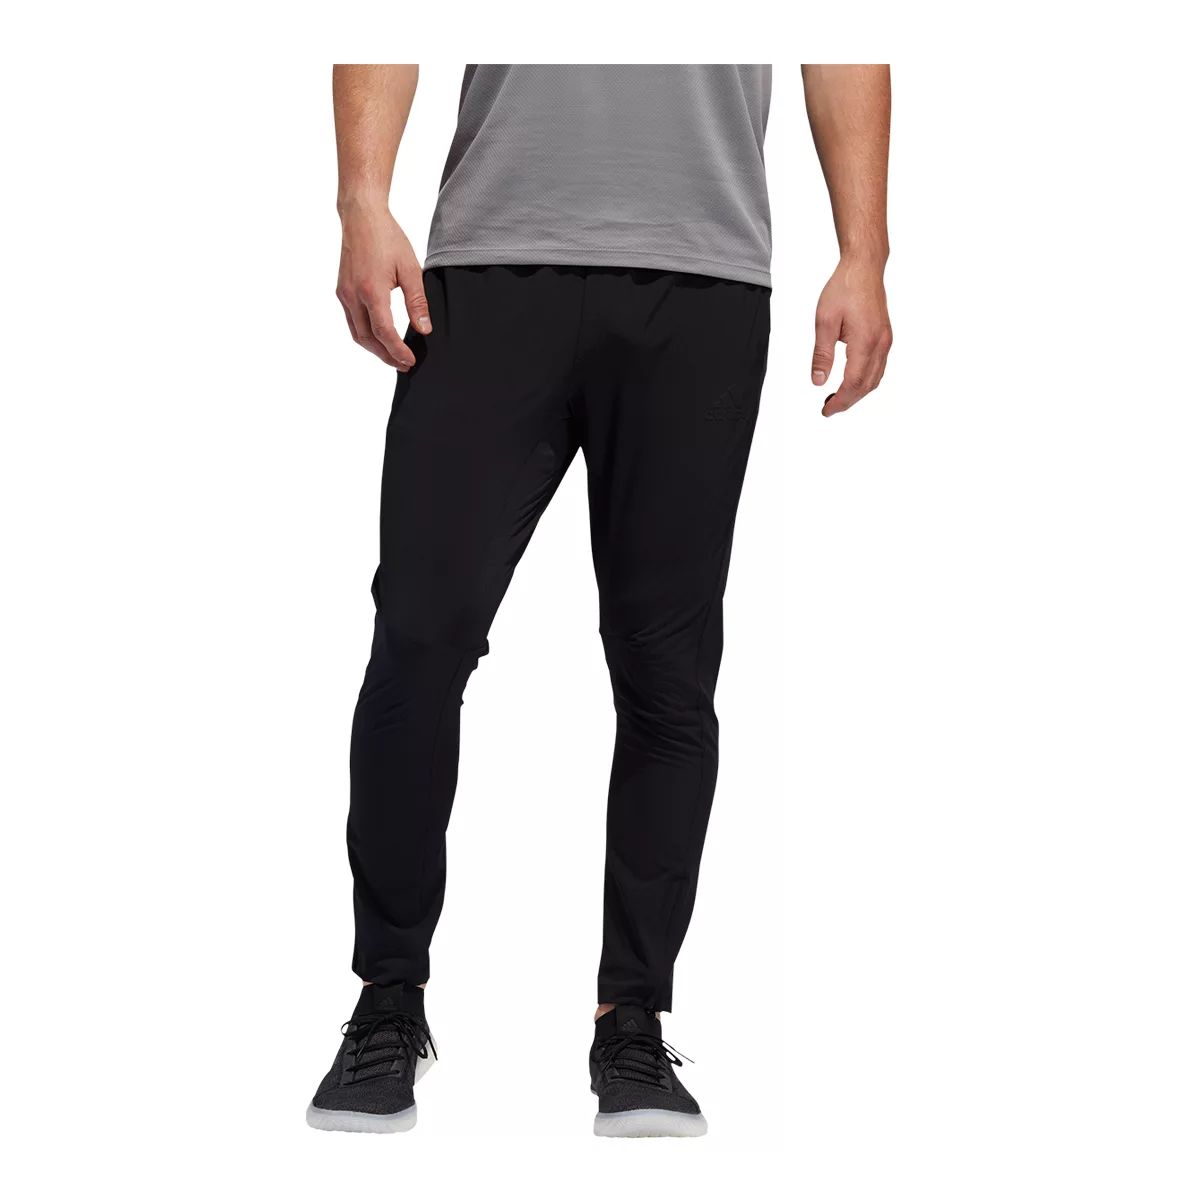 Under Armour Men's Stretch Woven Utility Cargo Pants, Water